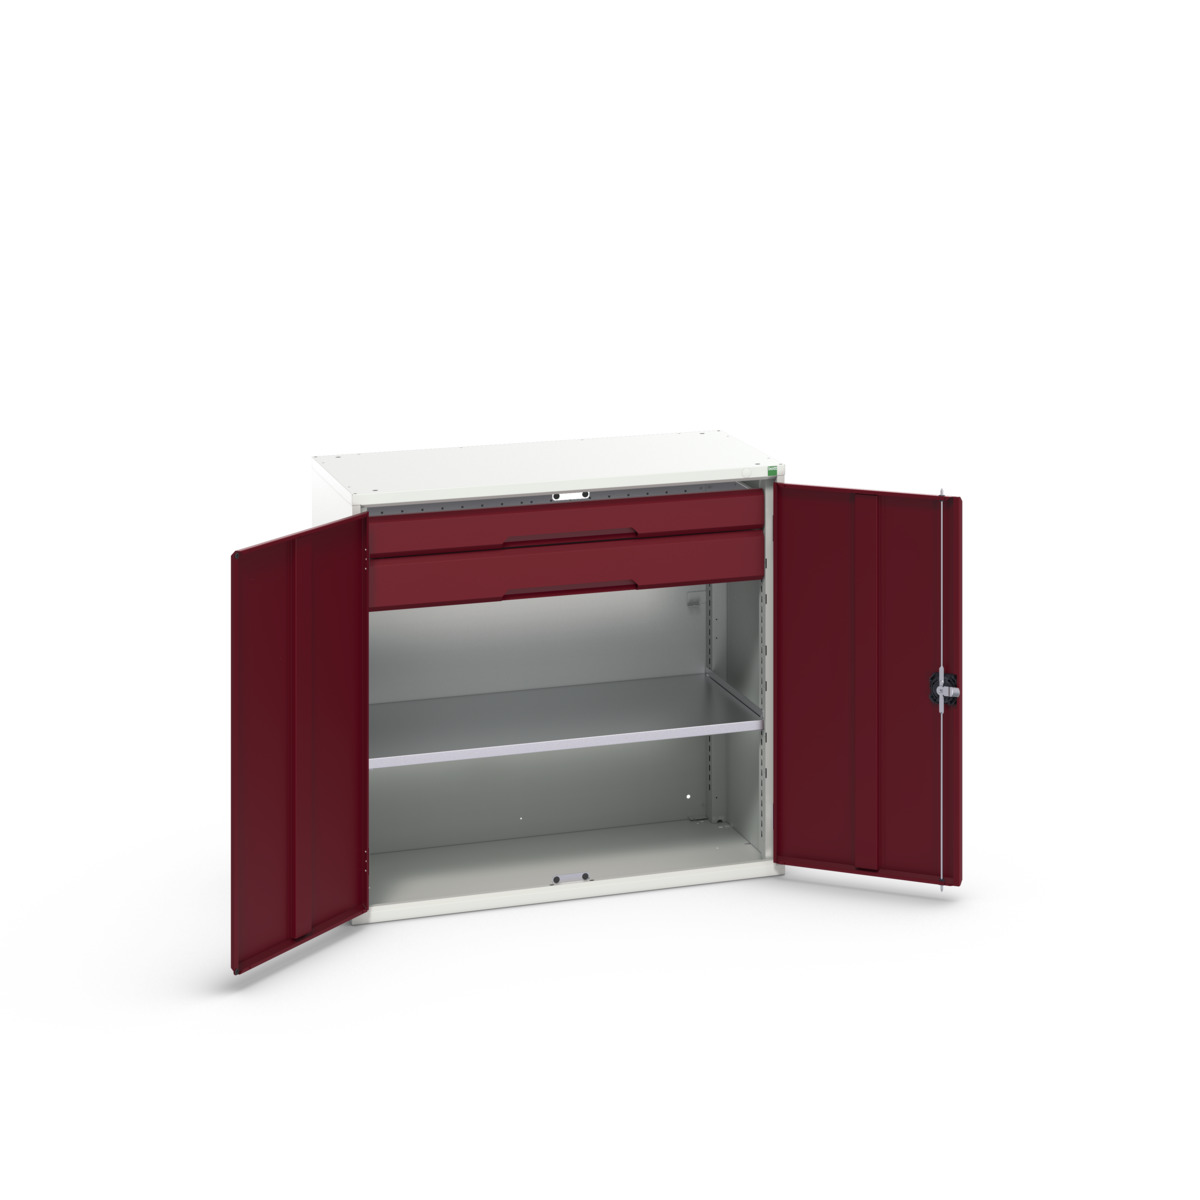 16926553.24 - verso kitted cupboard